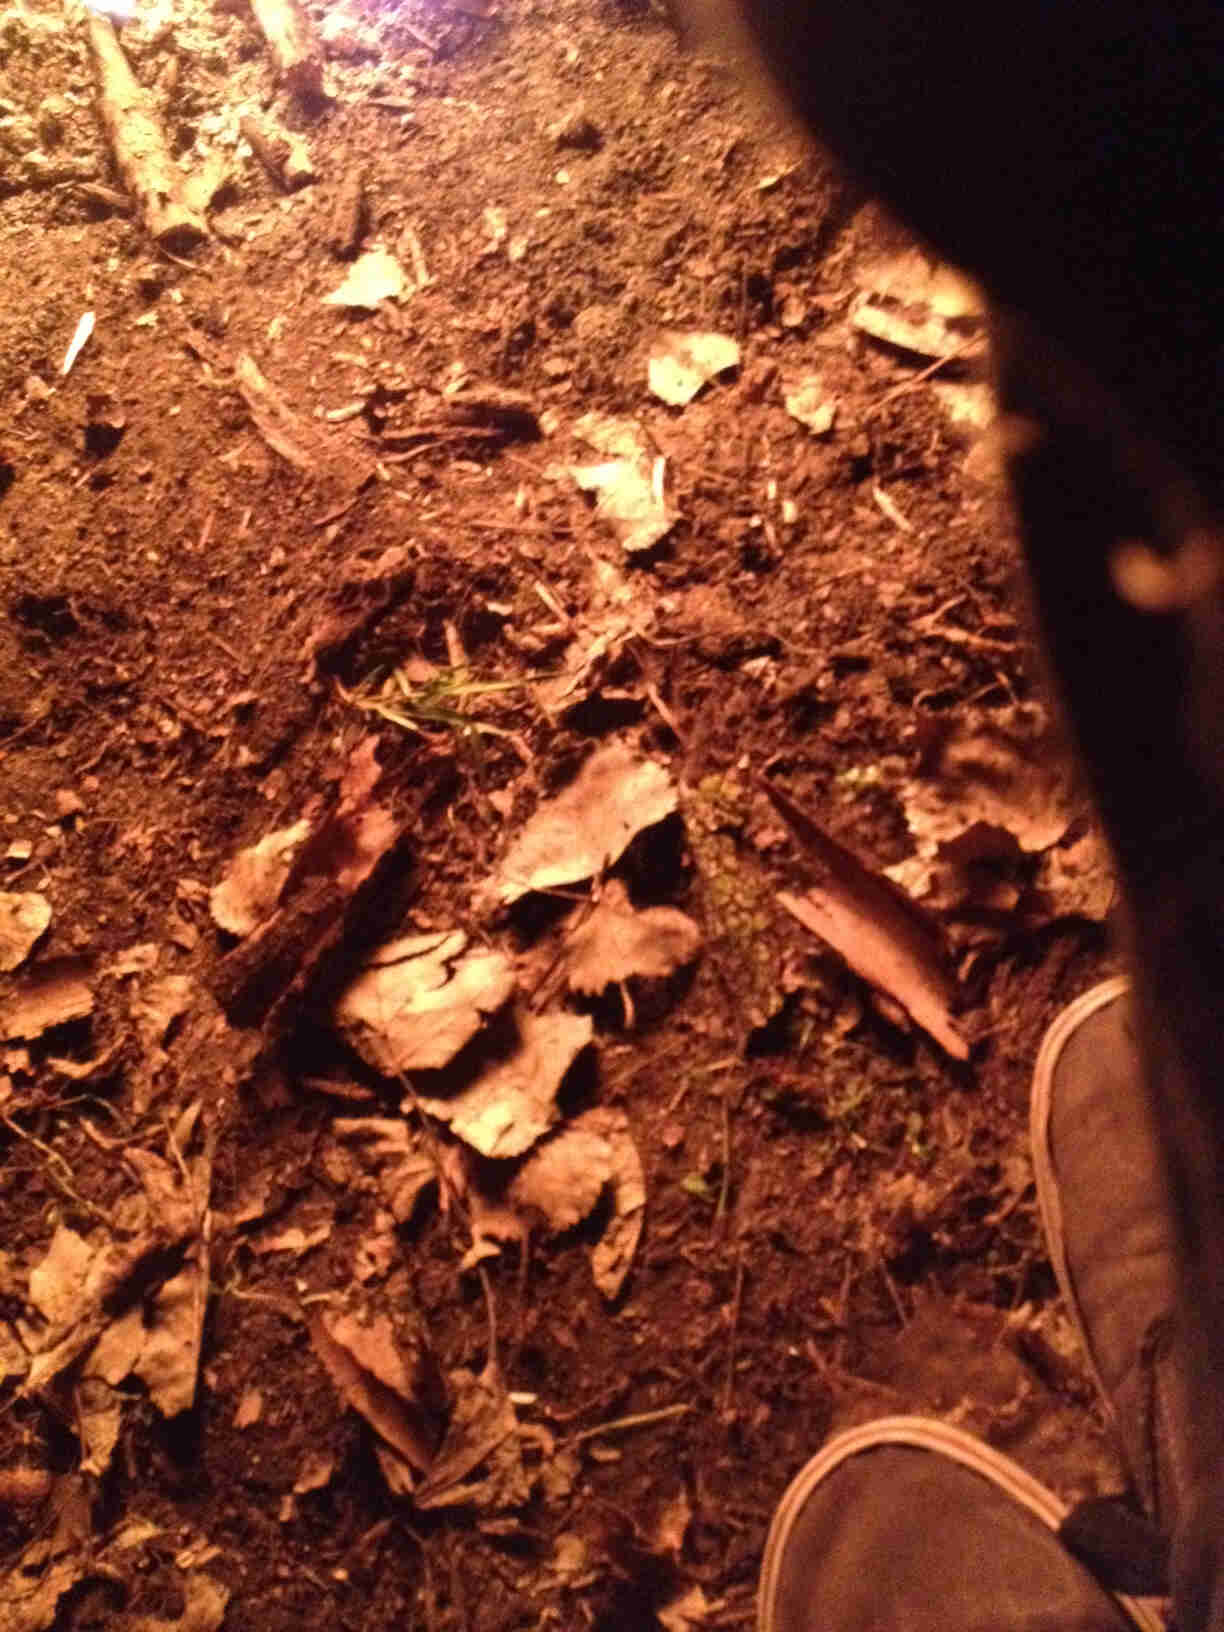 Down view of dirt and leaves, with the front of a person's shoes at the bottom right